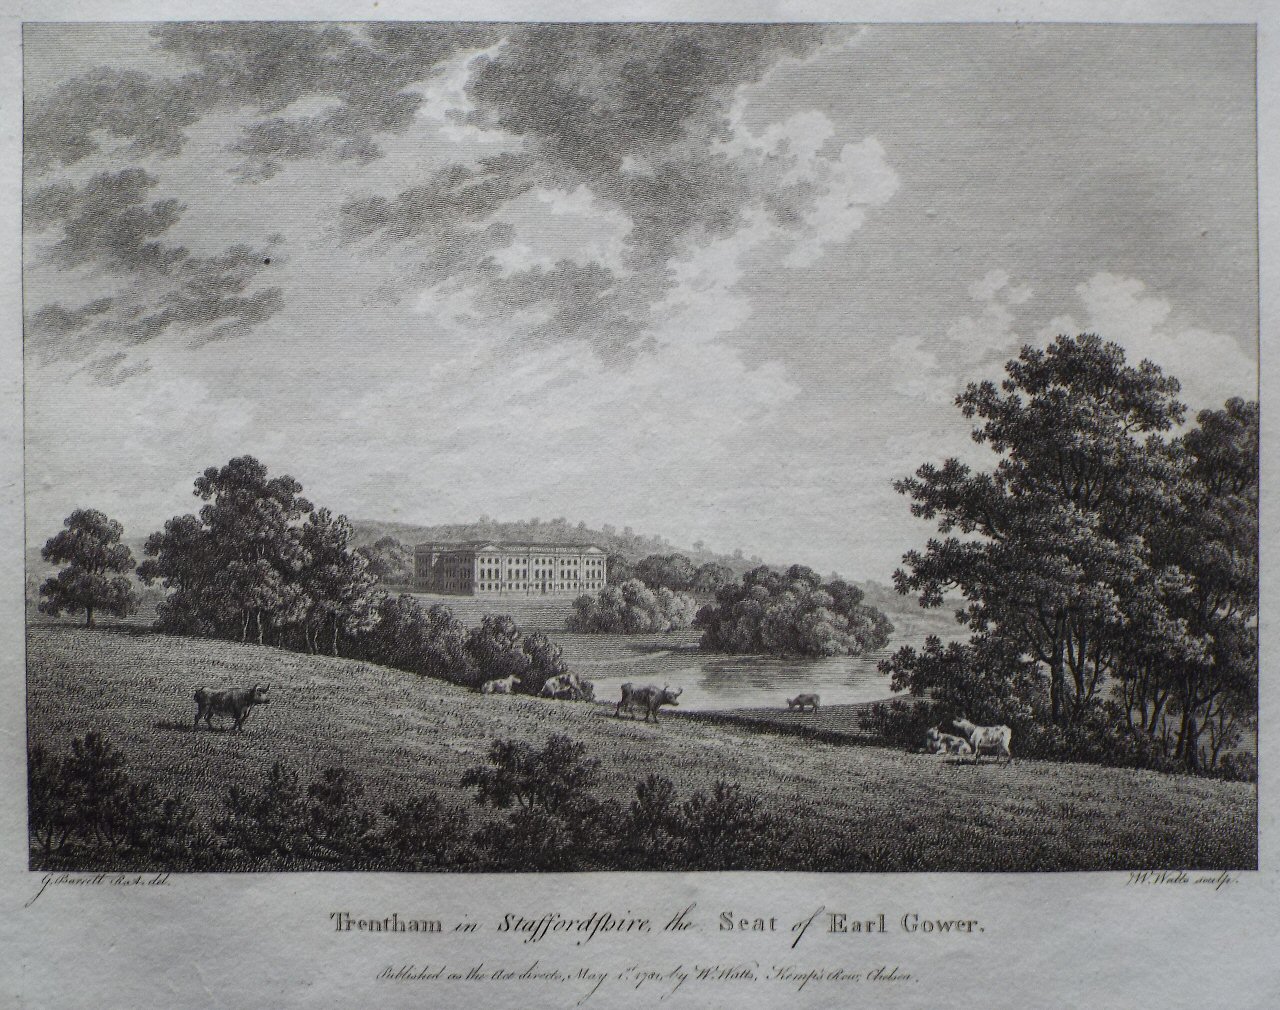 Print - Trentham in Staffordshire the Seat of Earl Gower. - Watts